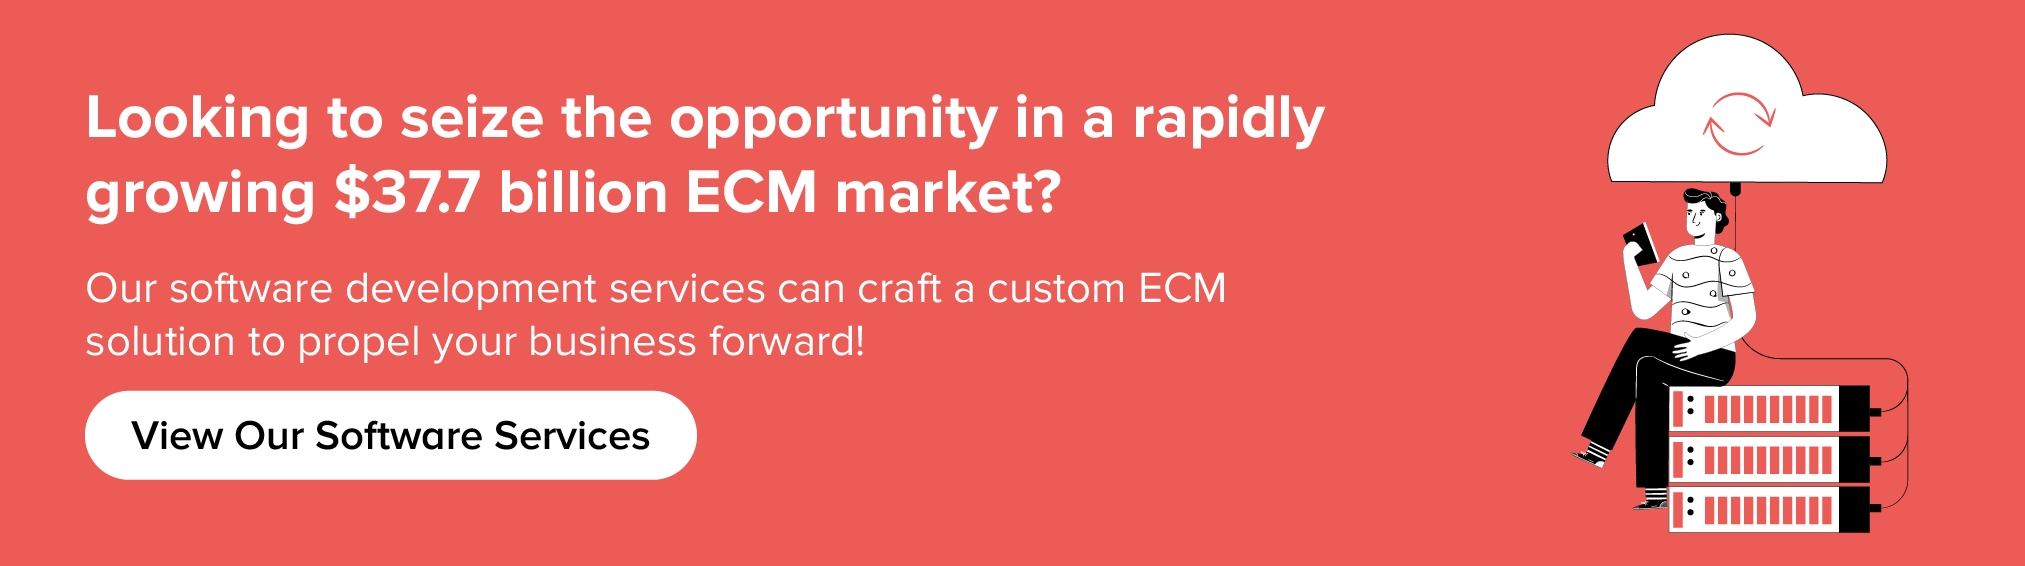 Collaborate with us to craft a custom ECM solution to propel your business forward!